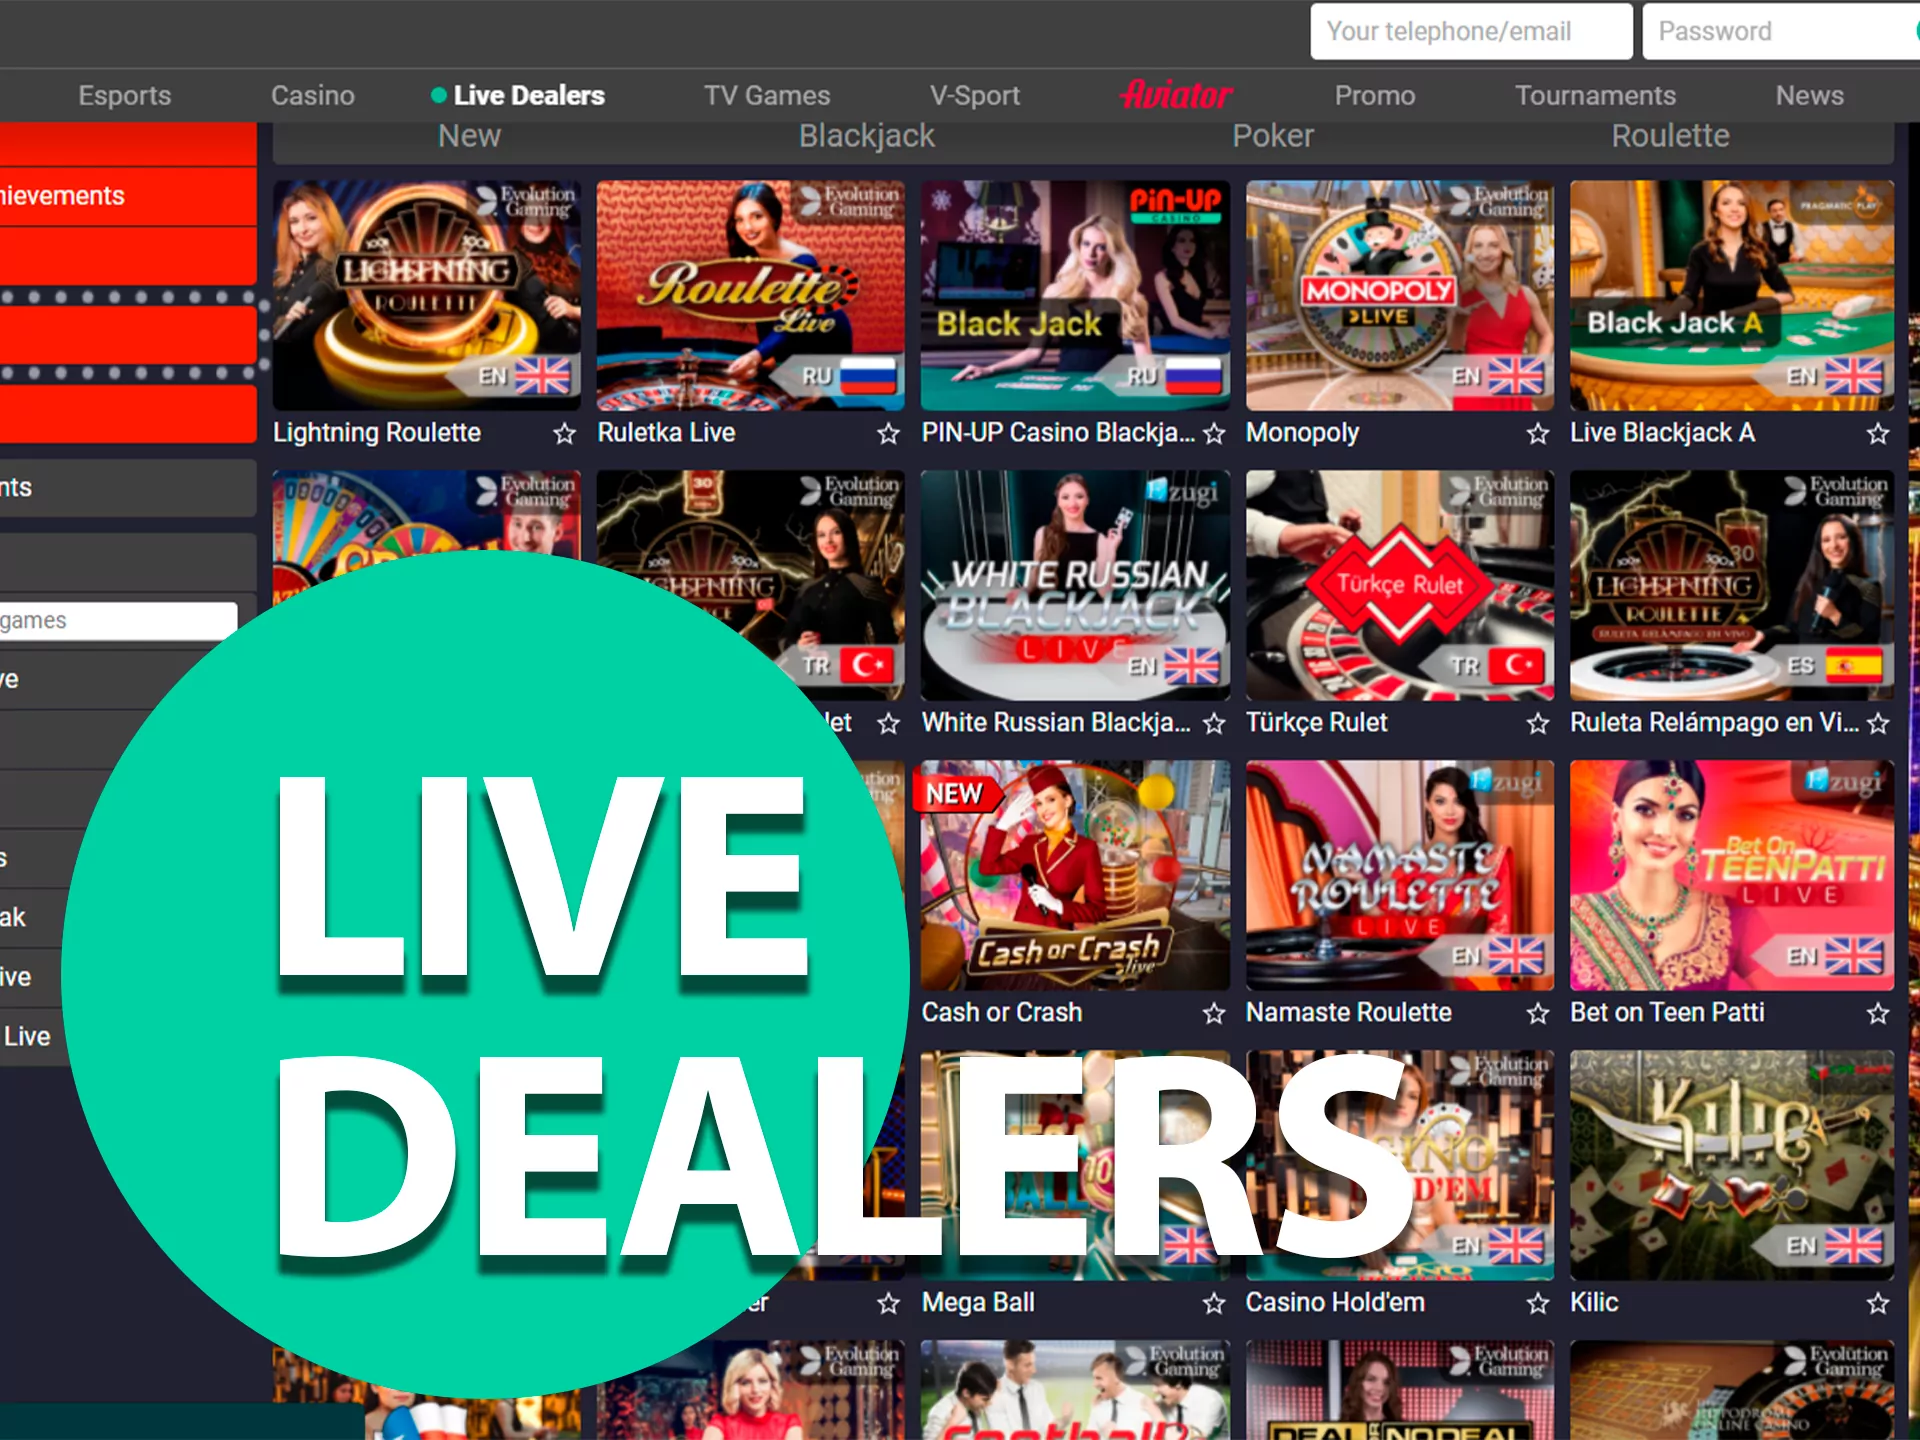 You can play casino games with live dealers.